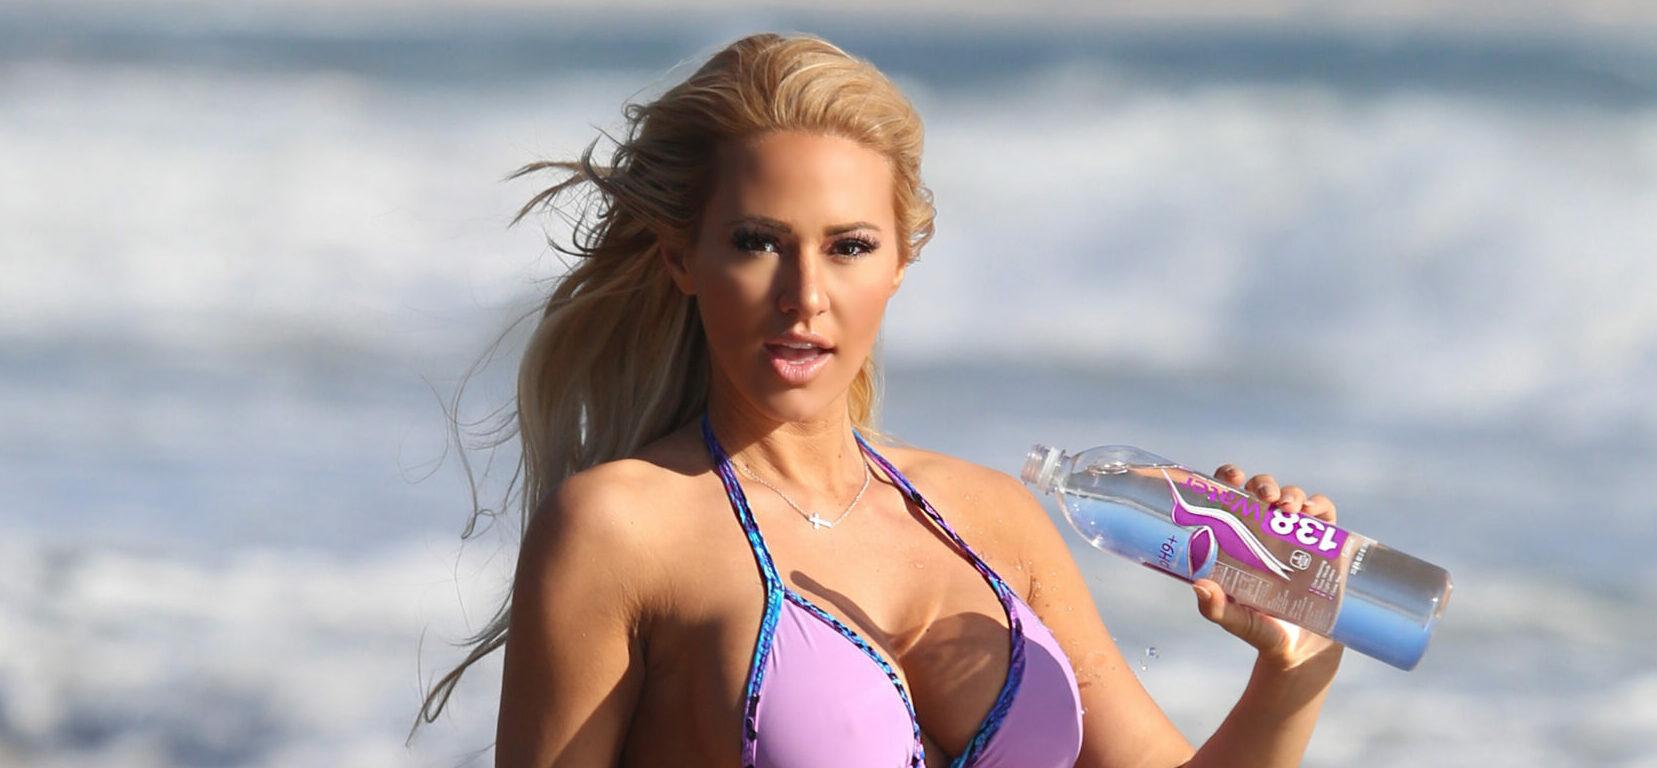 Kindly Myers shows off her bikini body while doing a beach photoshoot